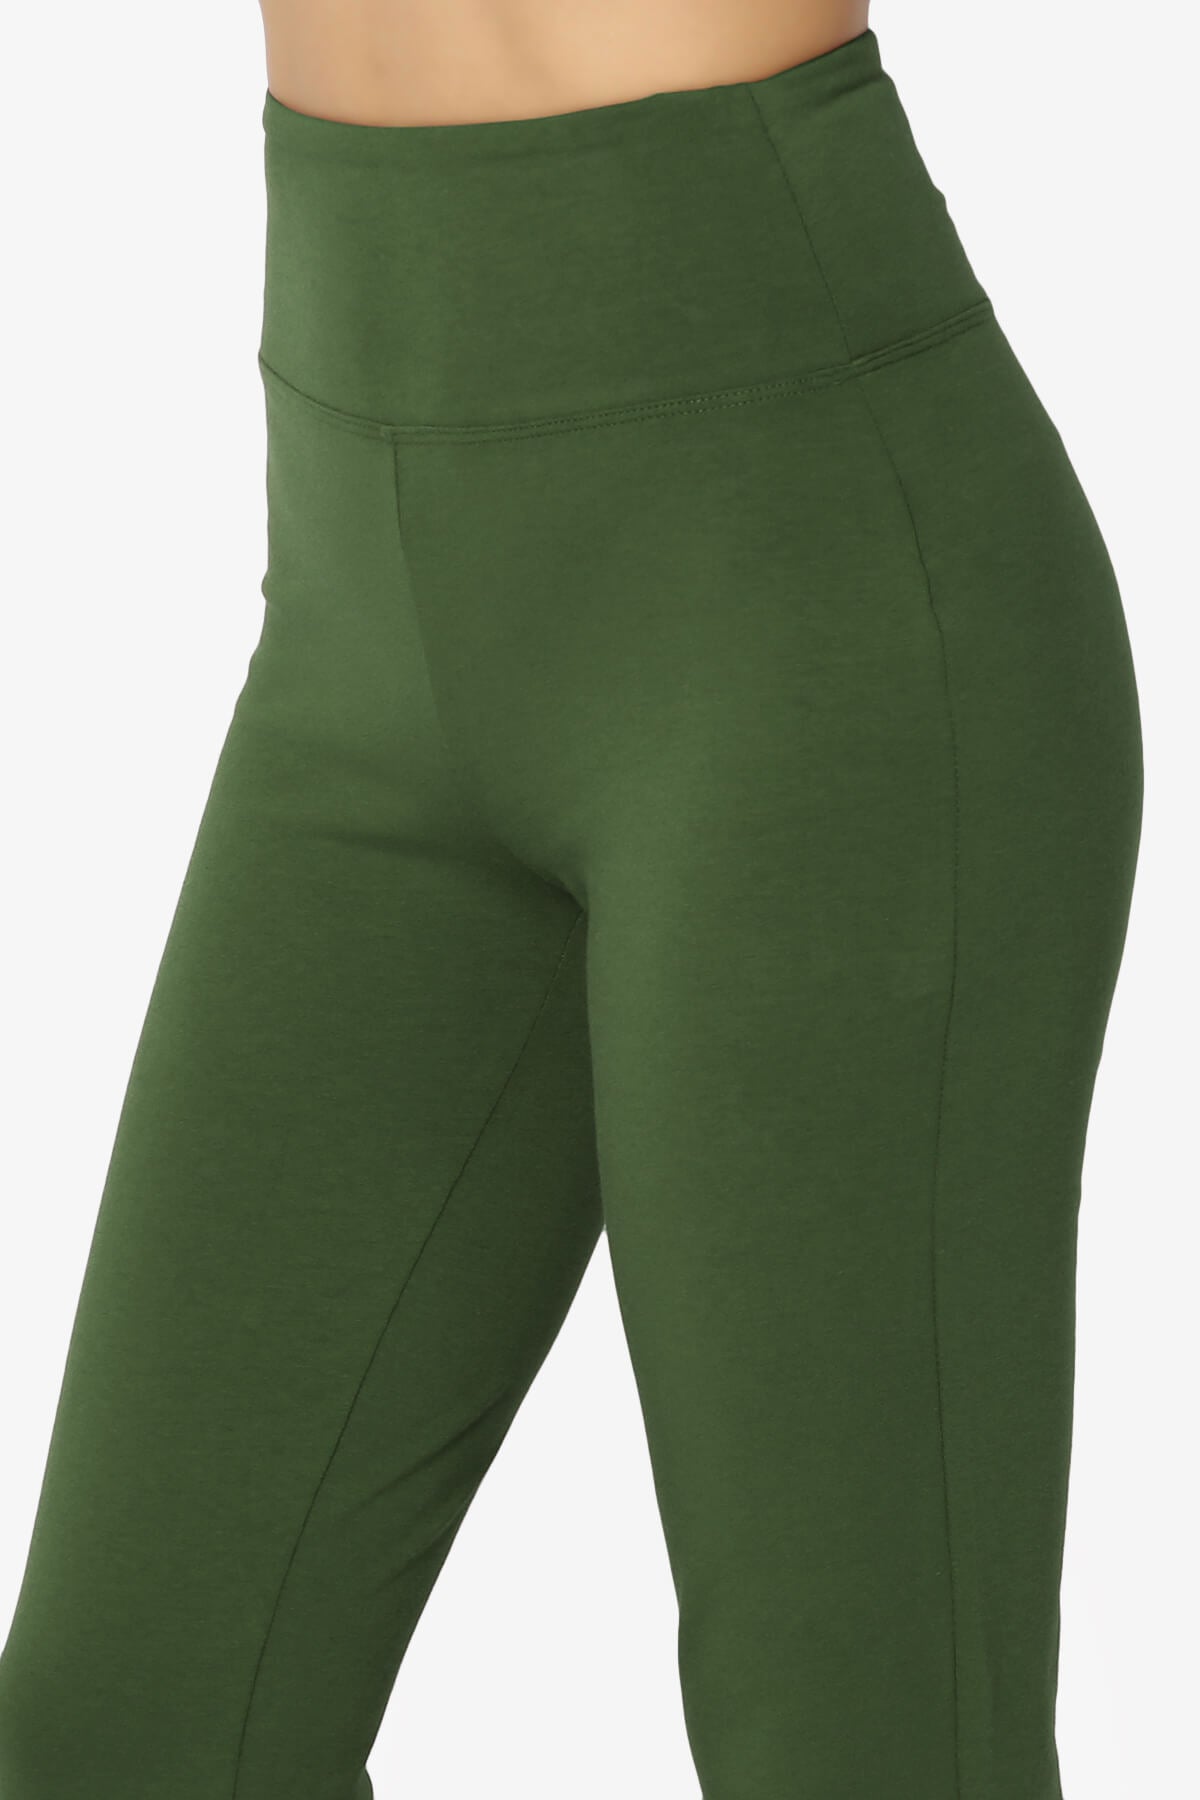 Load image into Gallery viewer, Zaylee Raw Hem Flared Comfy Yoga Pants ARMY GREEN_5
